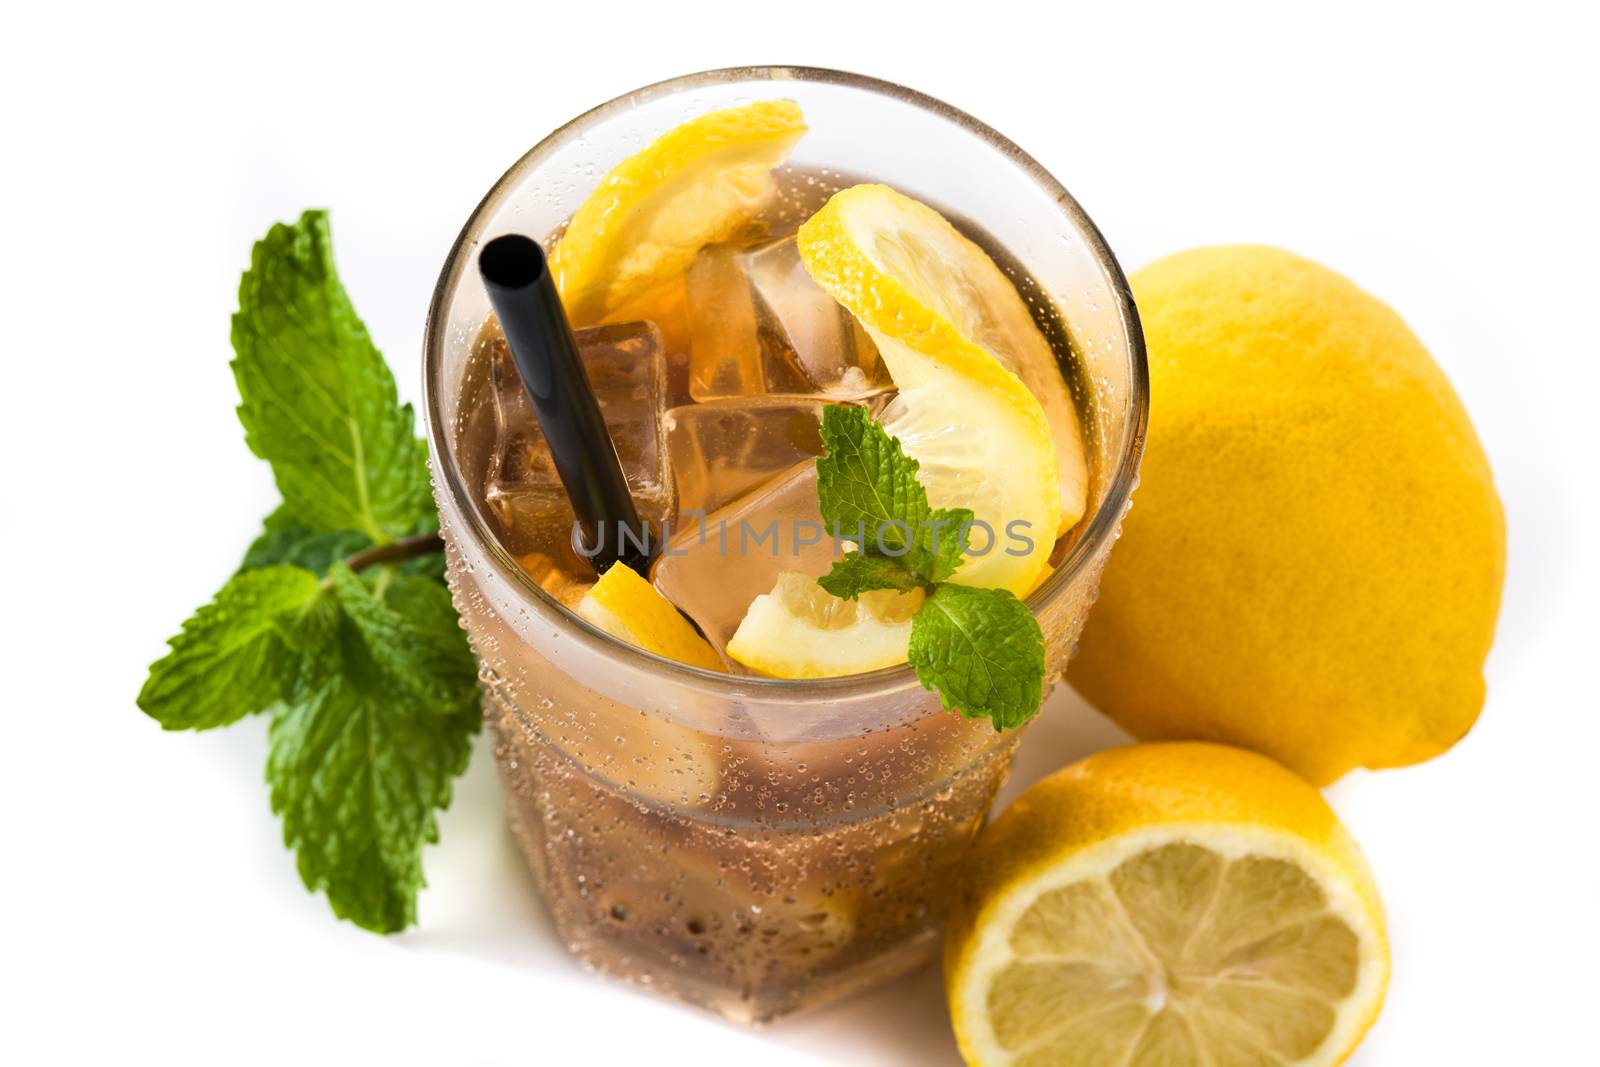 Iced tea drink with lemon in glass isolated on white background